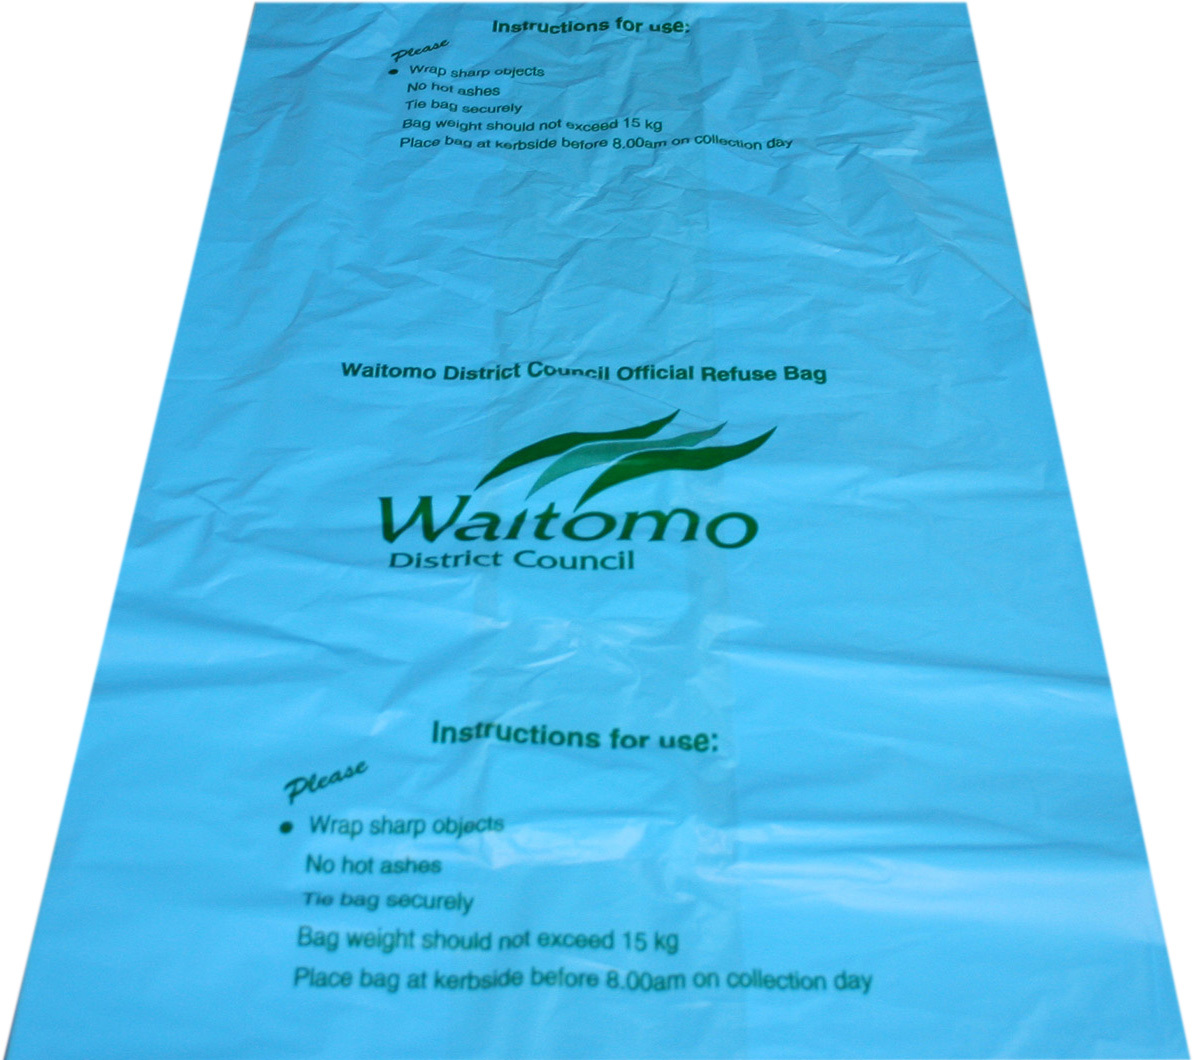 WDC's official rubbish bag is blue